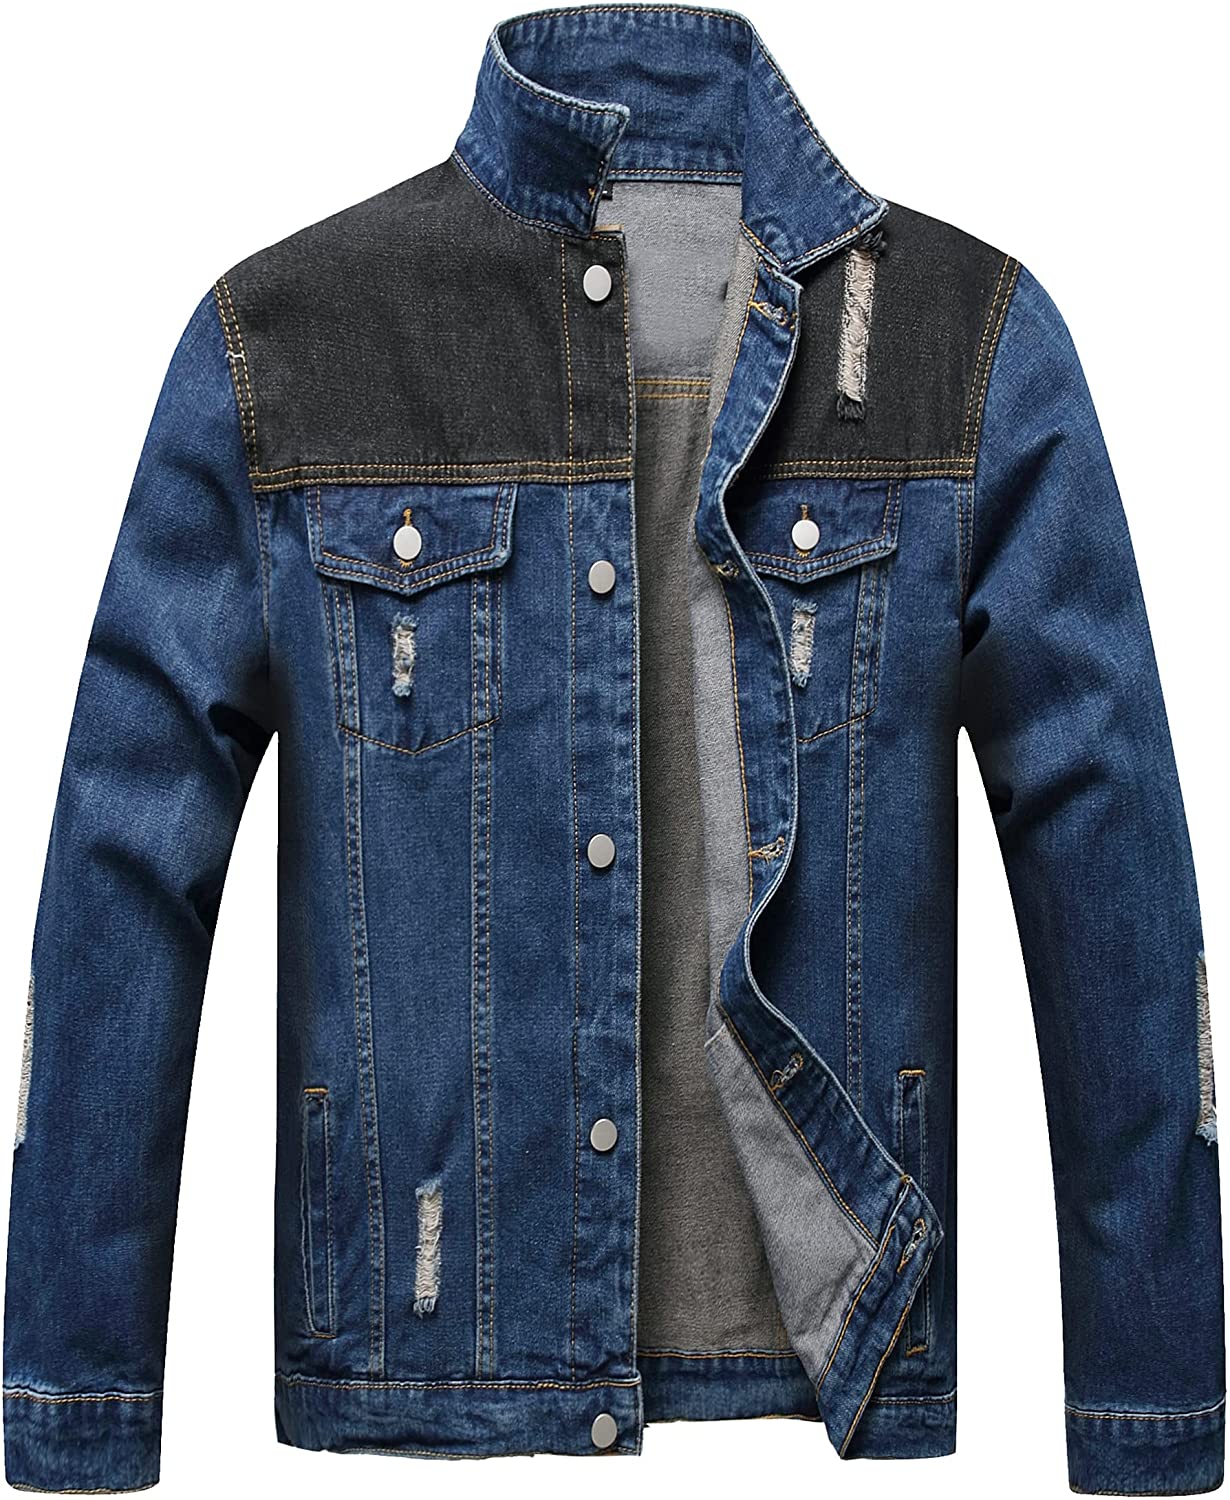 Classic Ripped Slim Denim Jacket with Holes LZLER Jean Jacket for Men 